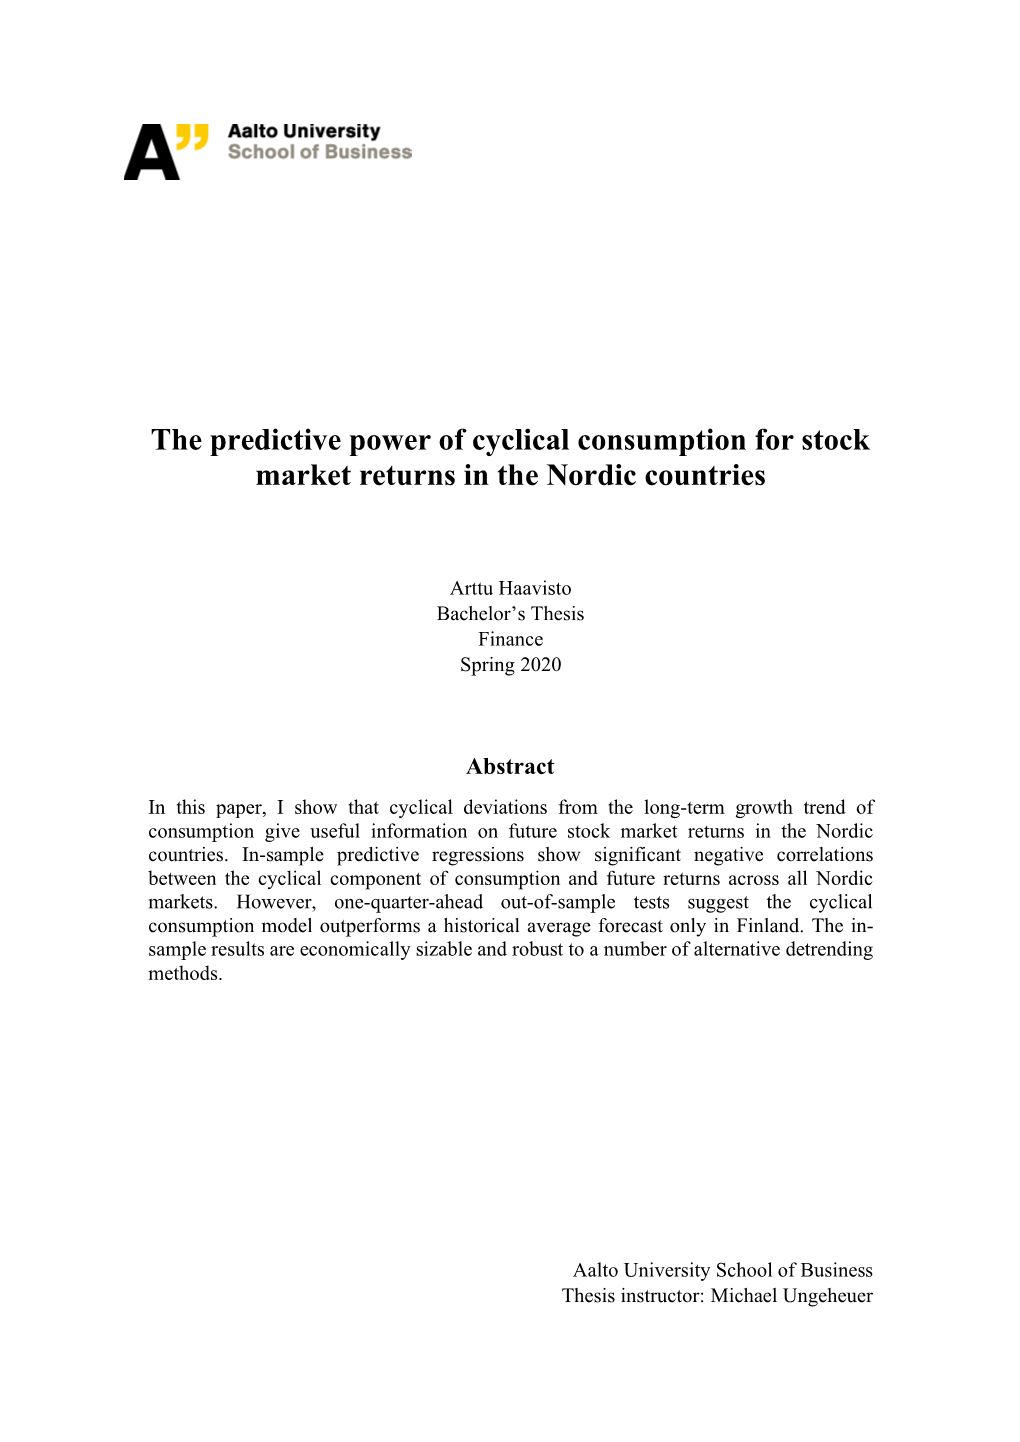 The Predictive Power of Cyclical Consumption for Stock Market Returns in the Nordic Countries